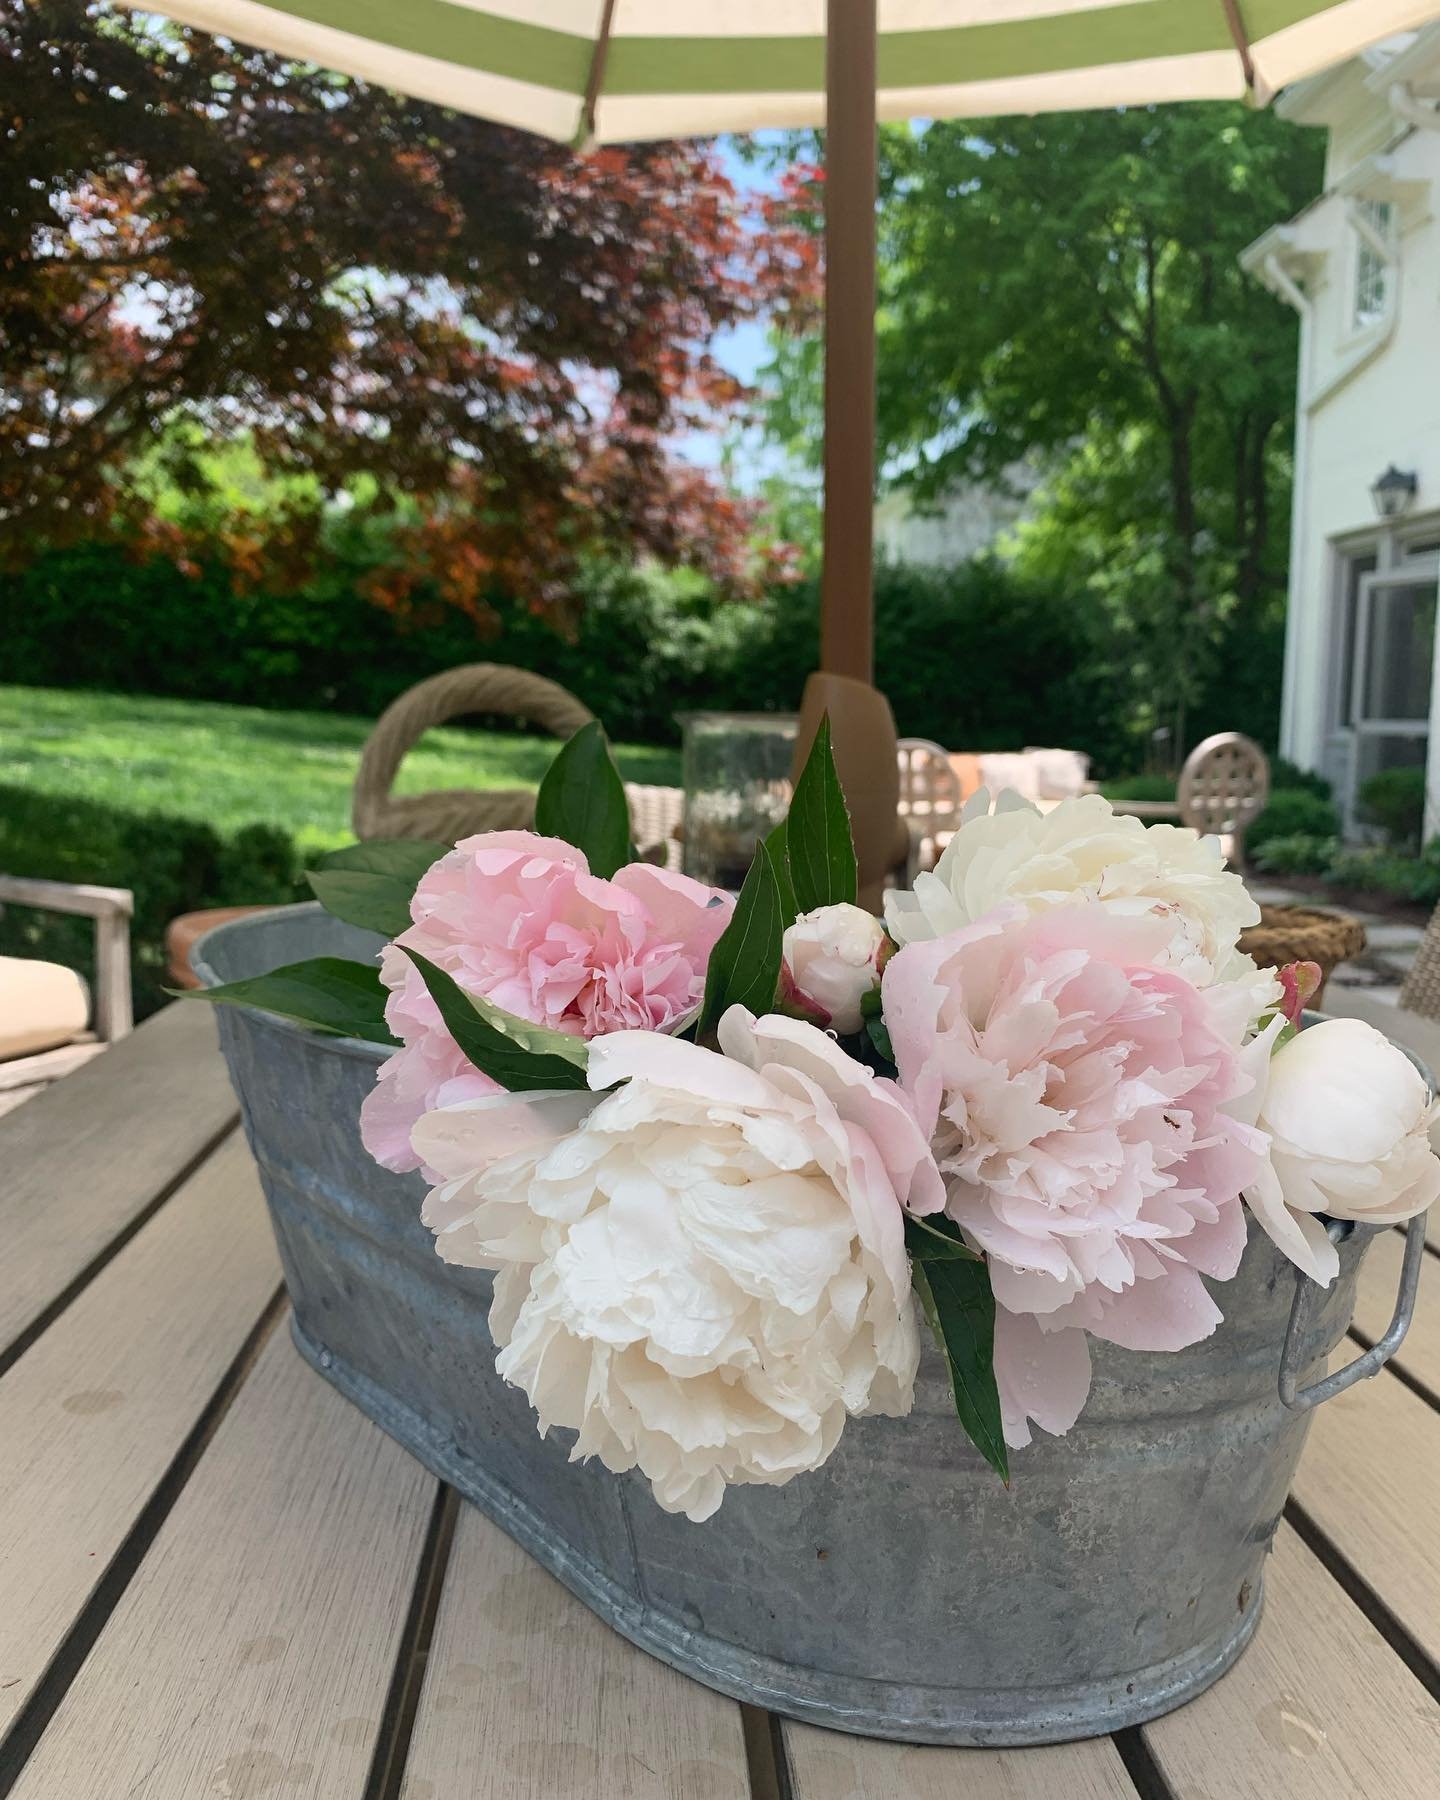 These peonies are from my garden. Aren&rsquo;t they gorgeous! The scent is so fragrant, if you close your eyes, I promise you&rsquo;ll be able to smell them. I know I can. Well, that may be because the bouquet is close by.😆 Happy Gardening everyone!